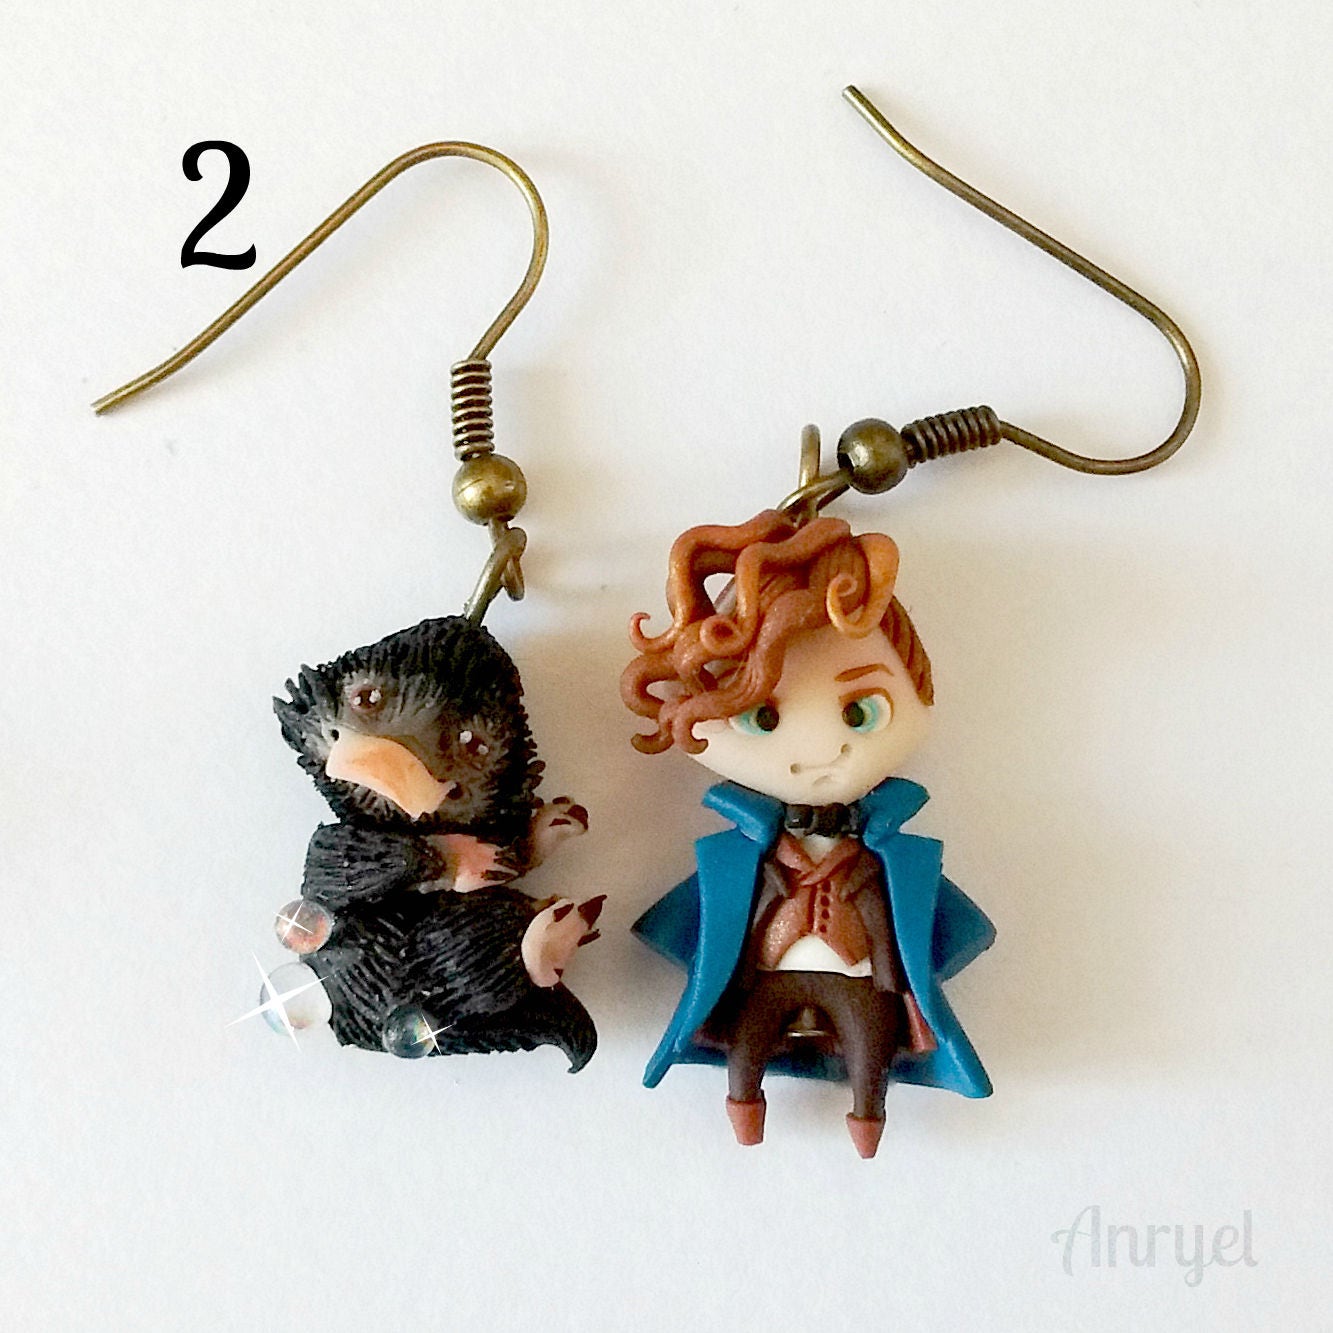 Fantastic Beasts and Where to Find Them FAN ART Niffler Newt - Etsy